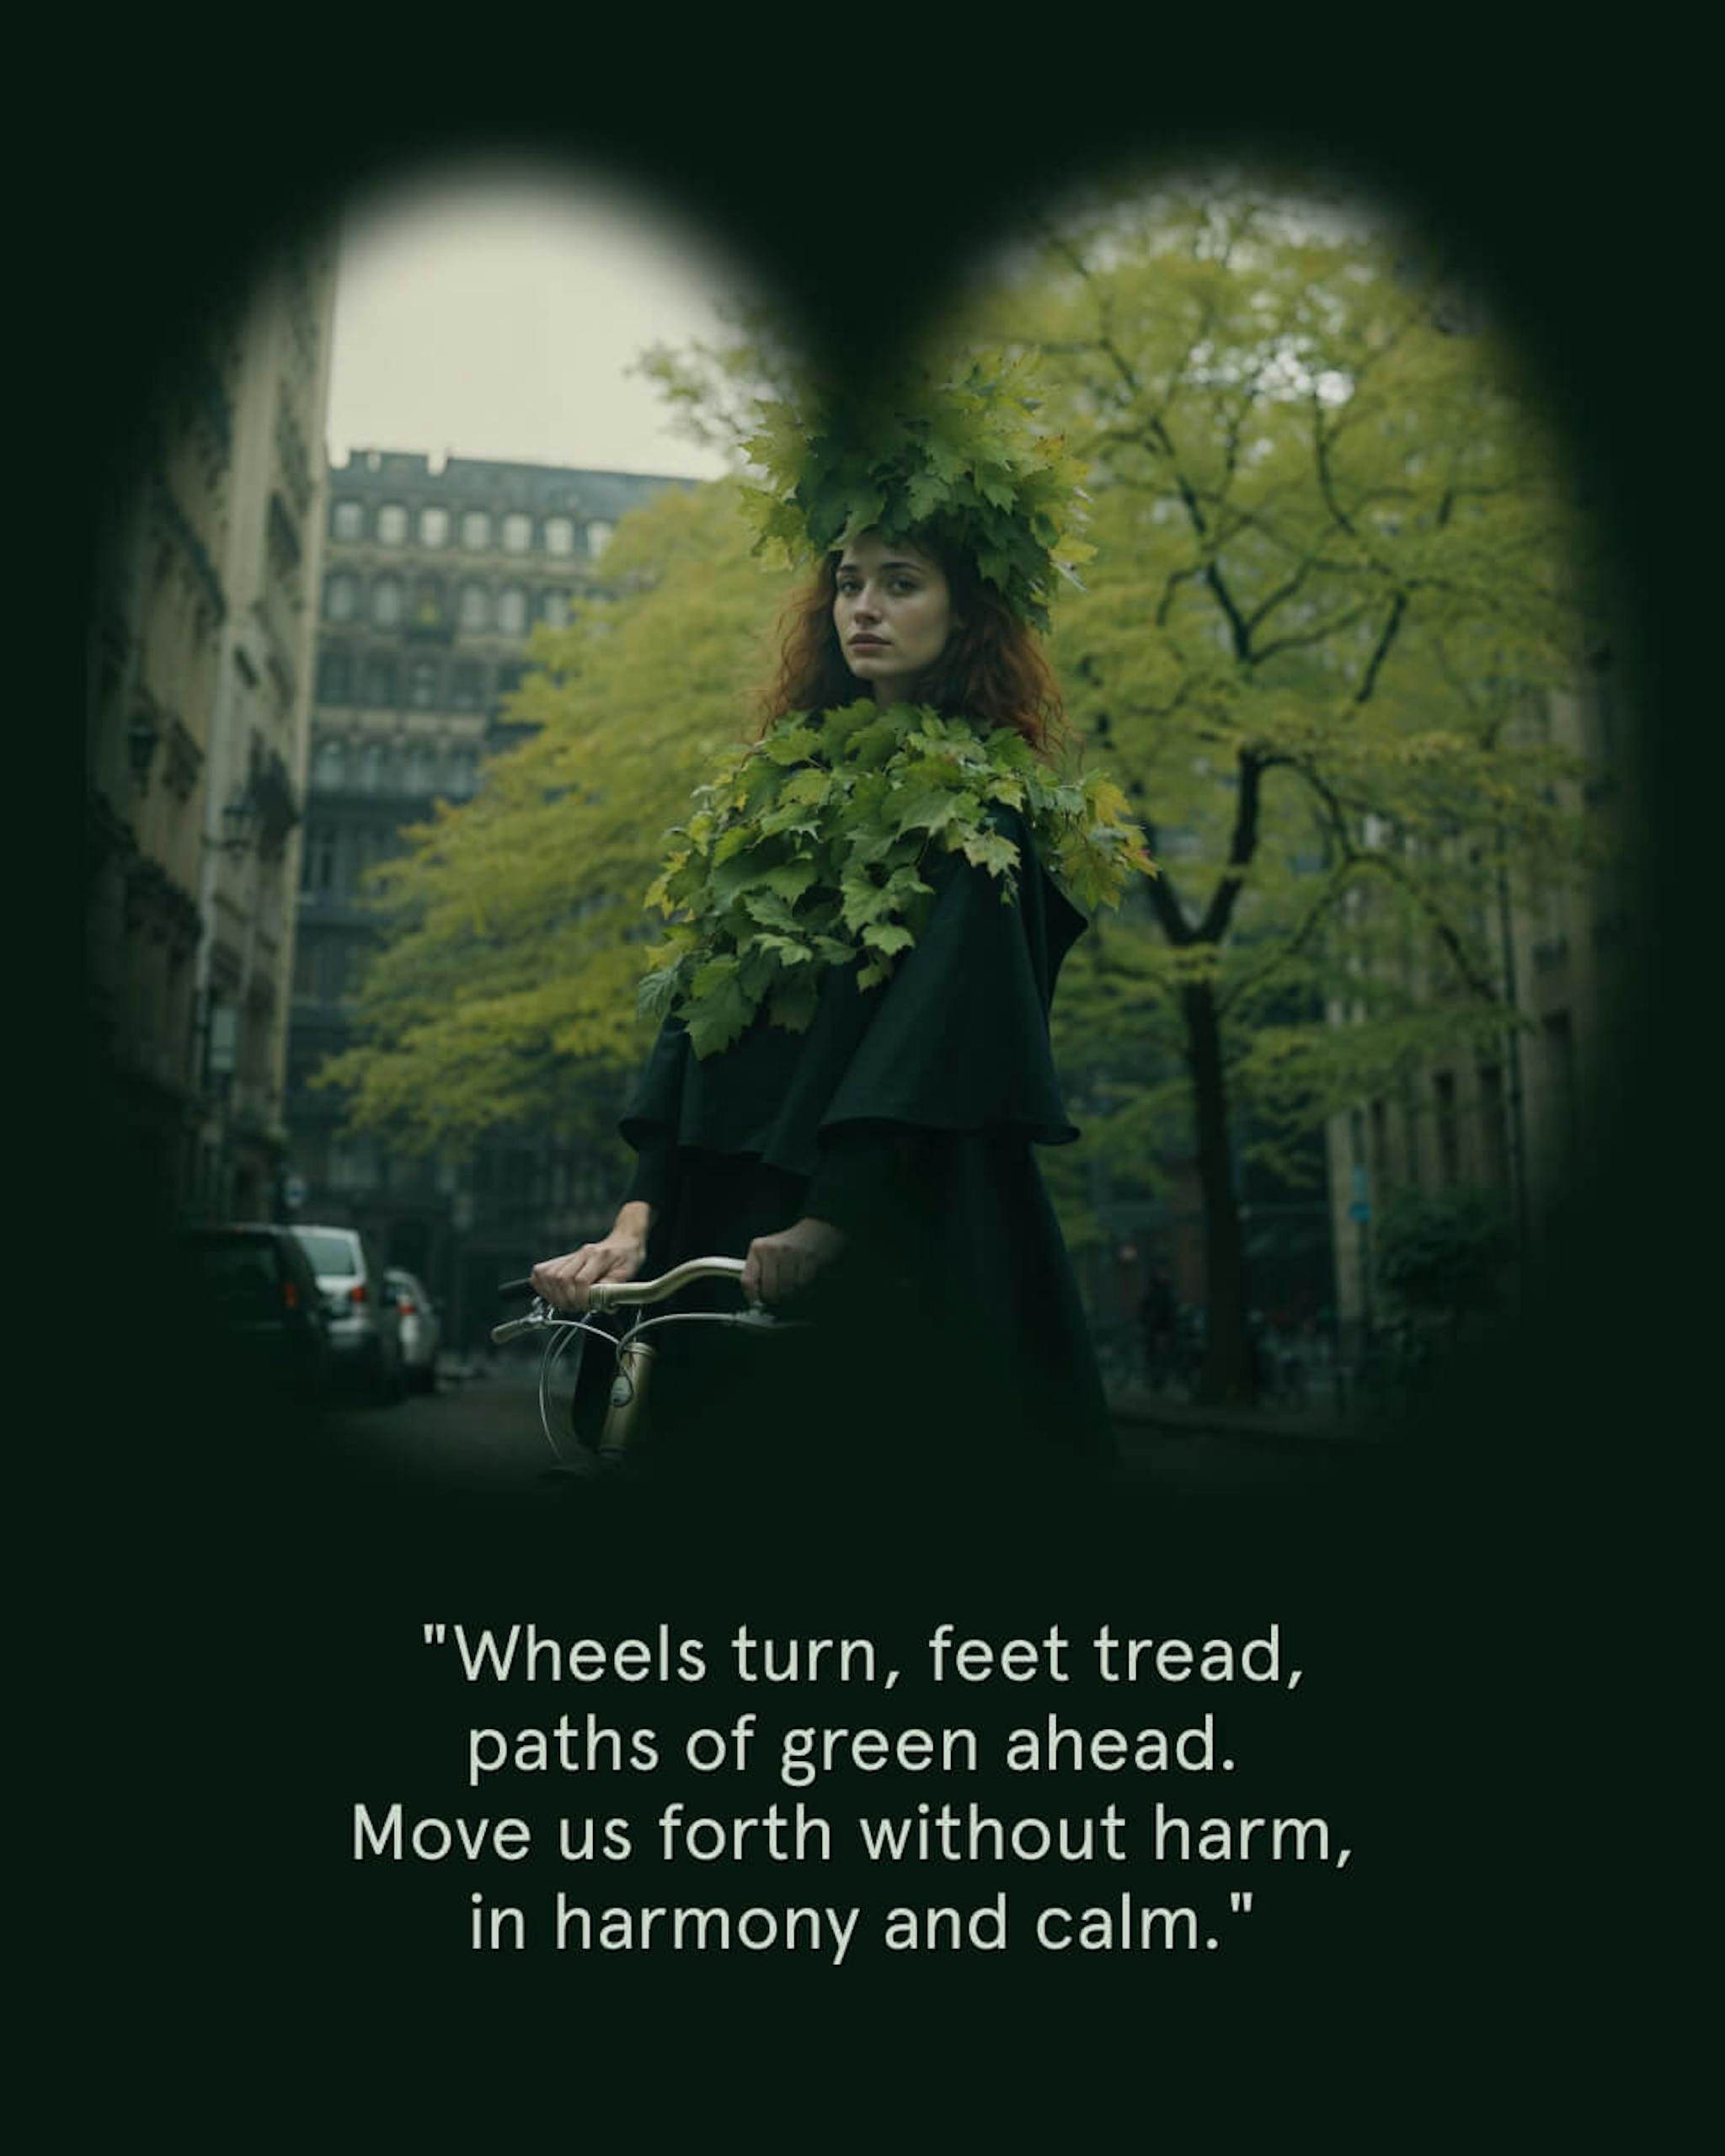 A person in the image is wearing a leafy headdress and riding a bicycle in a city, viewed through a binocular vignette with a quote: "Wheels turn, feet tread, paths of green ahead. Move us forth without harm, in harmony and calm."